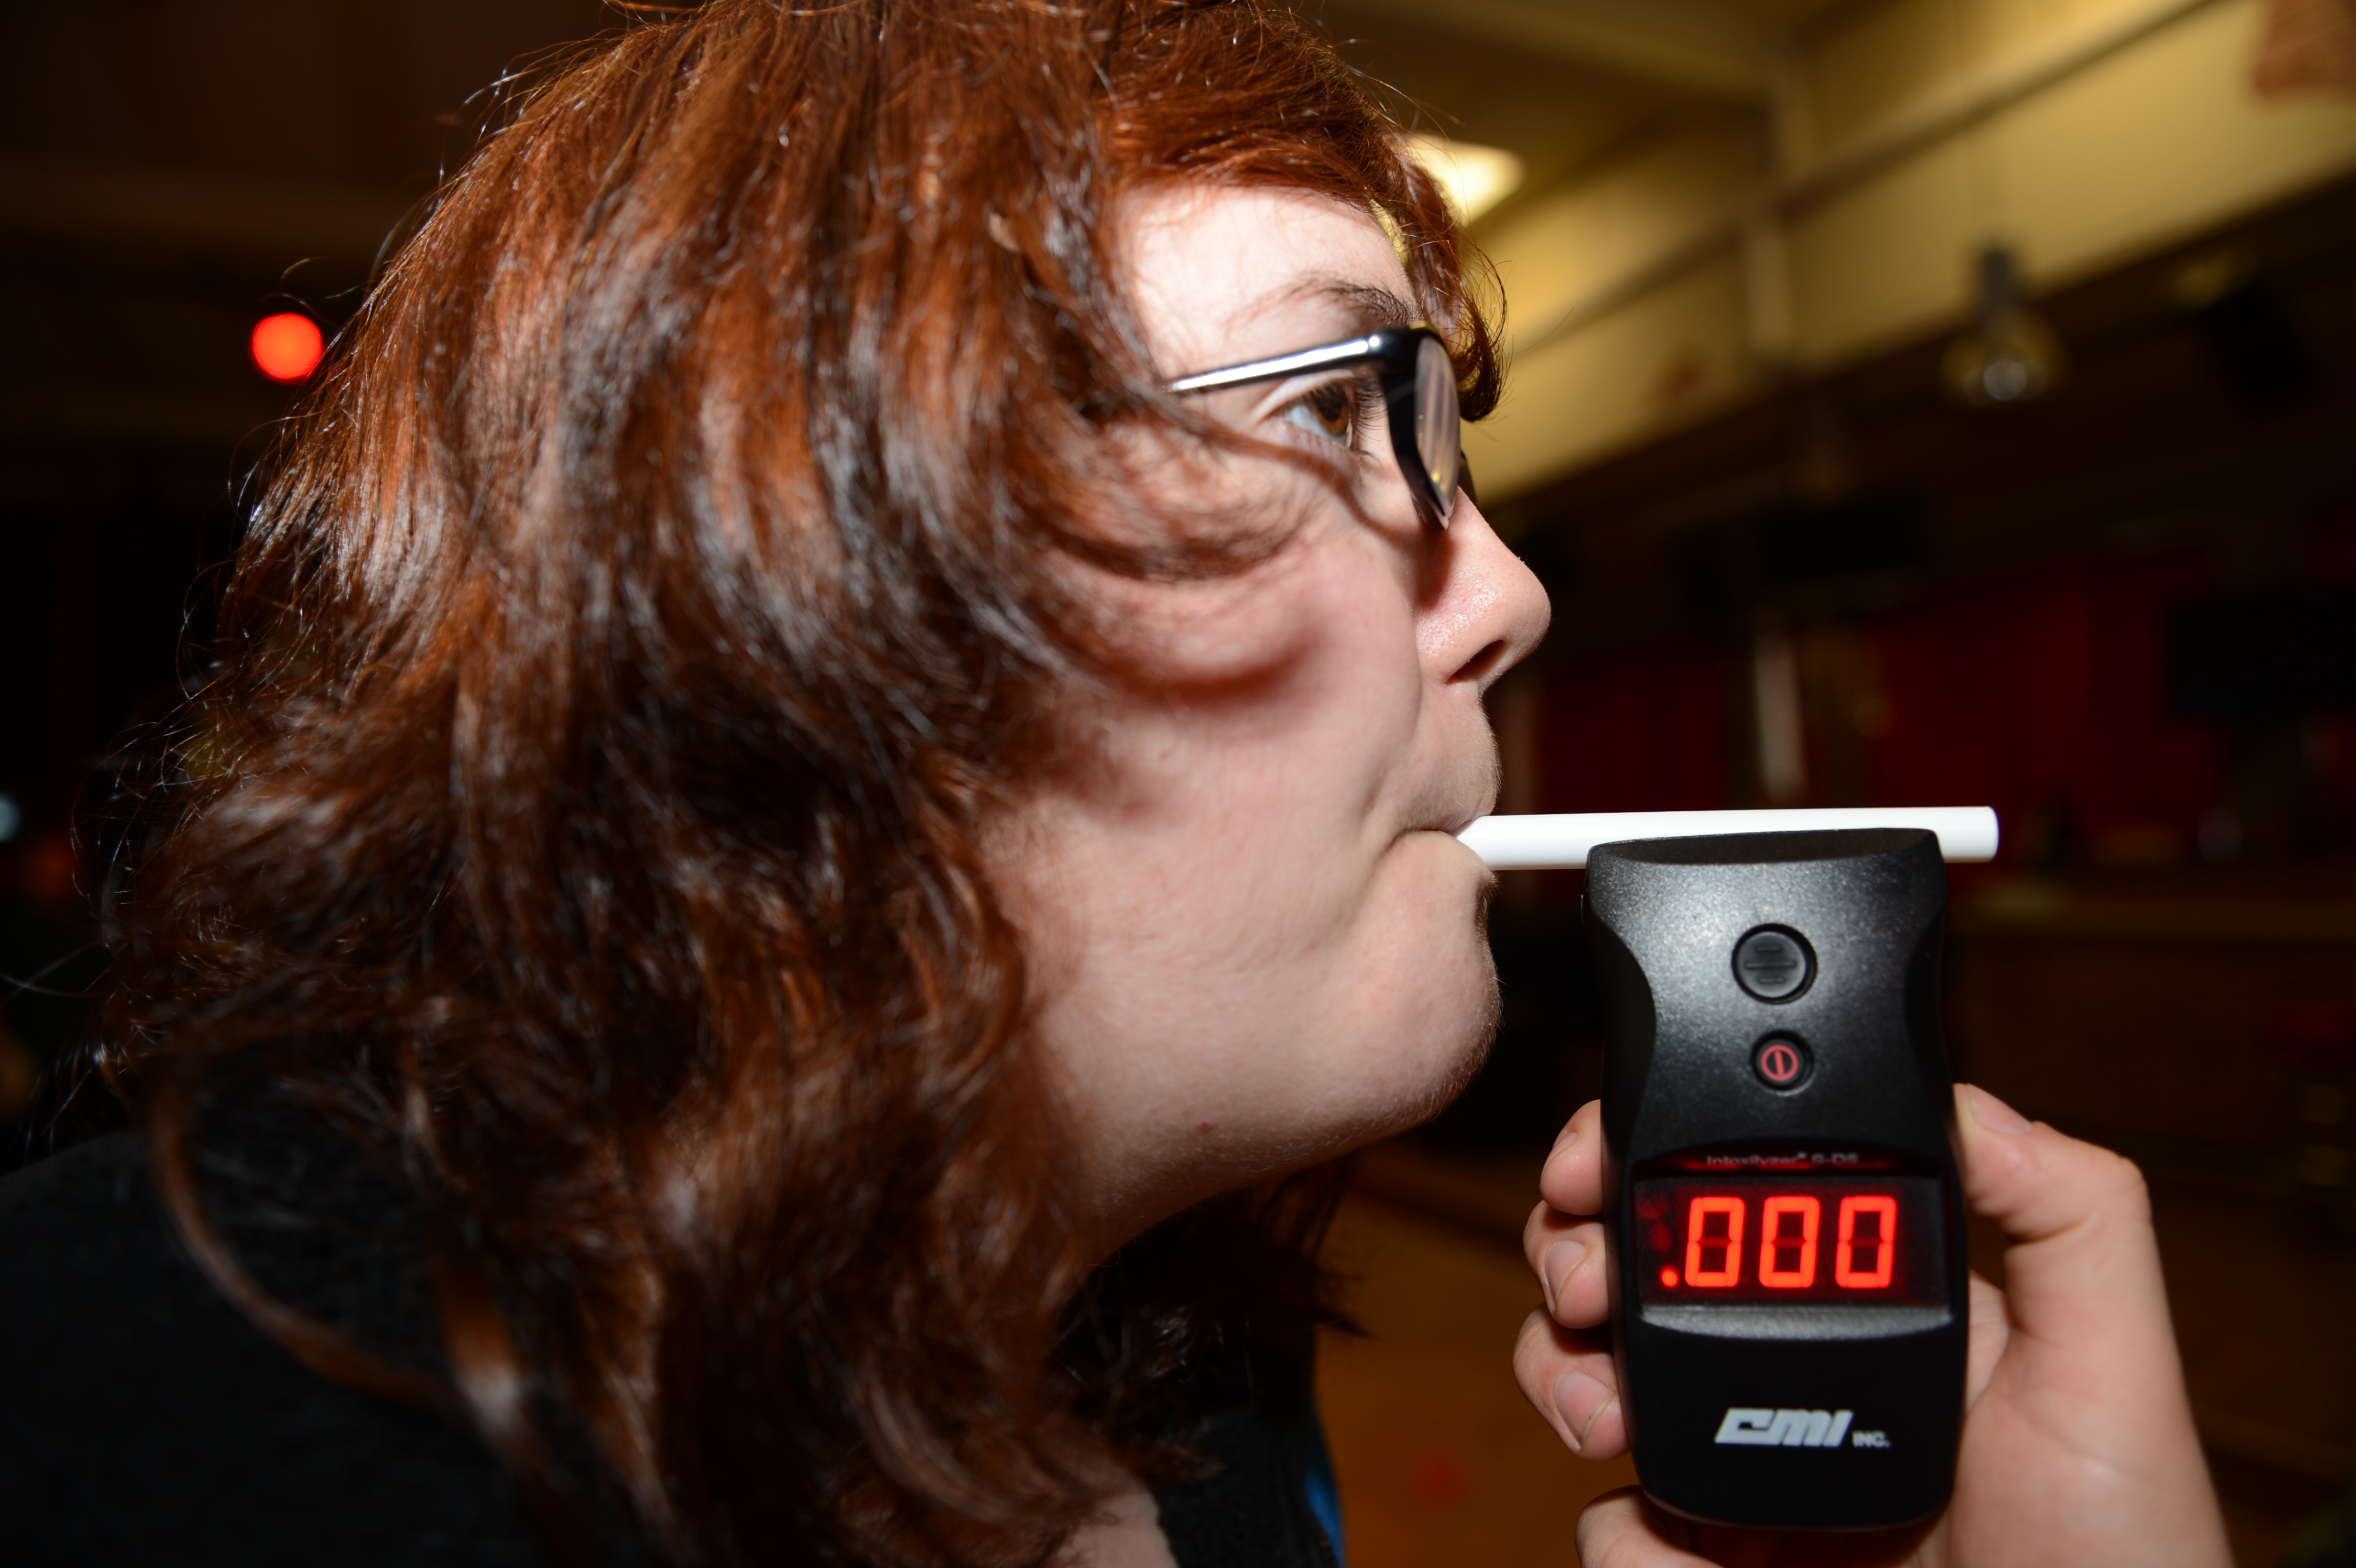 Woman blowing into breathalyzer.